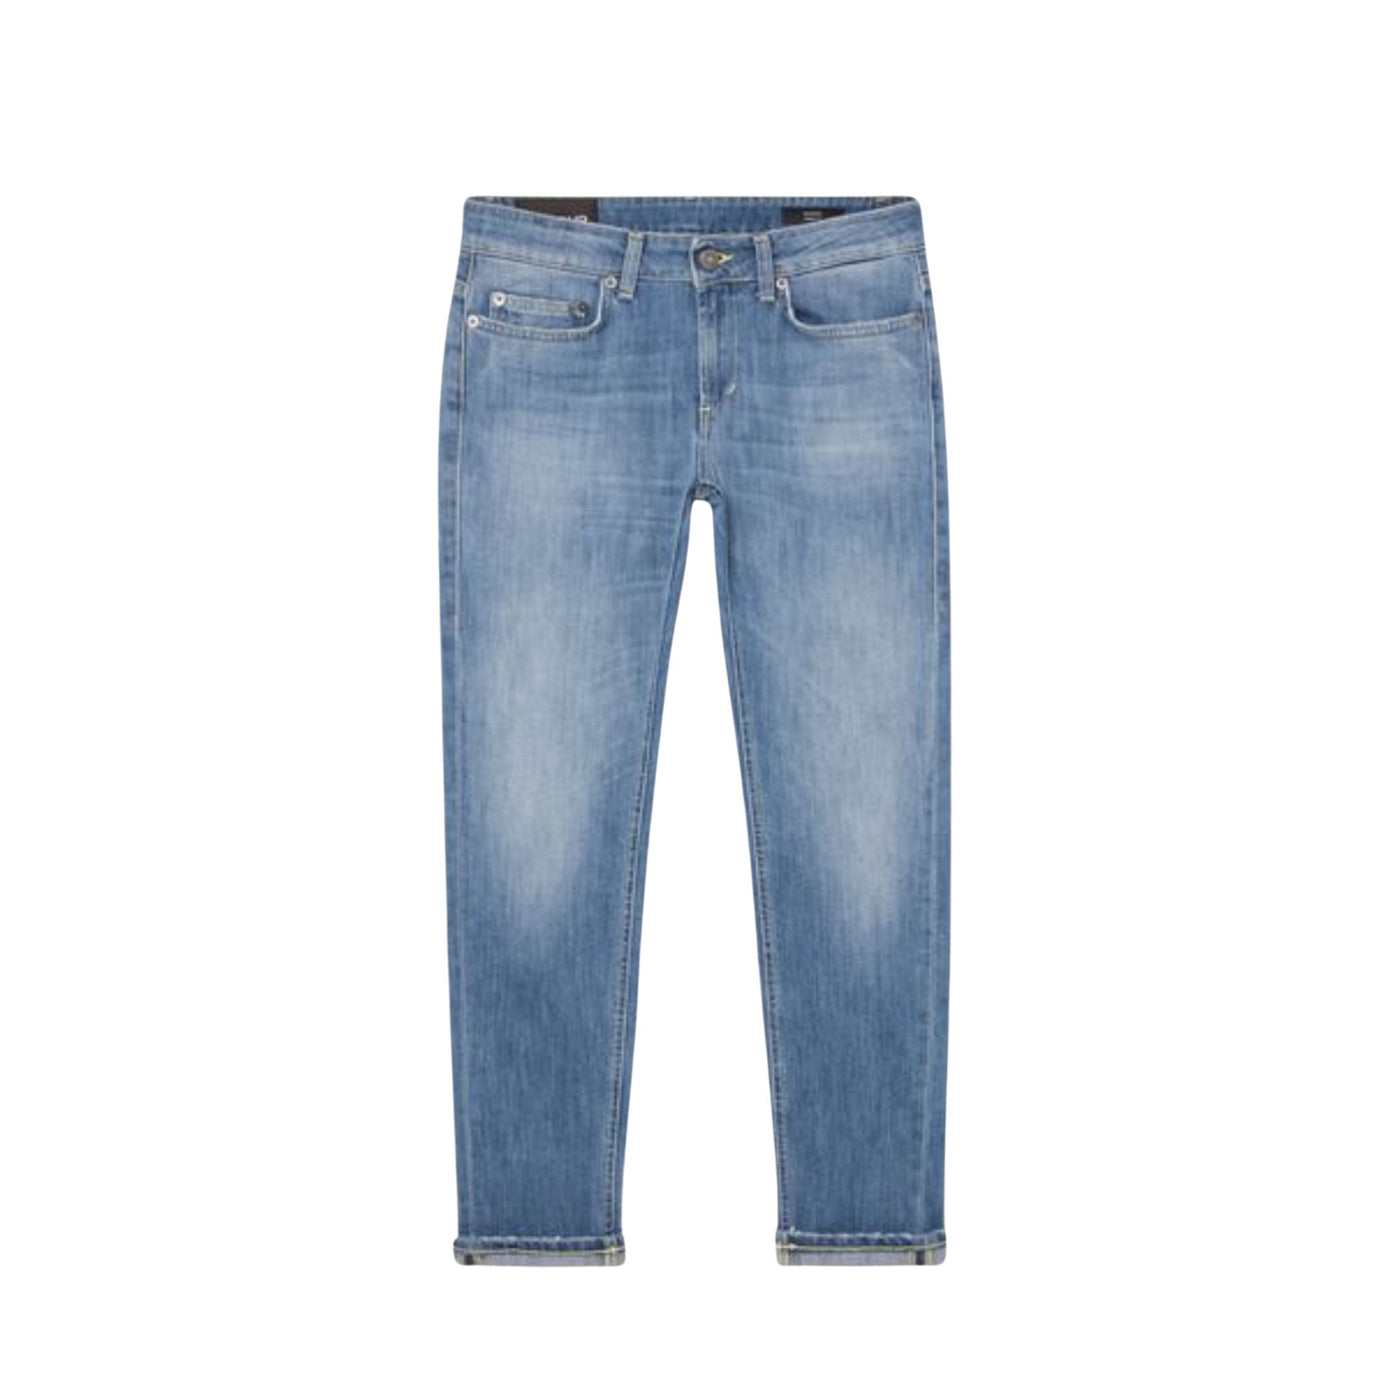 Short Women's Jeans with washed out fabric